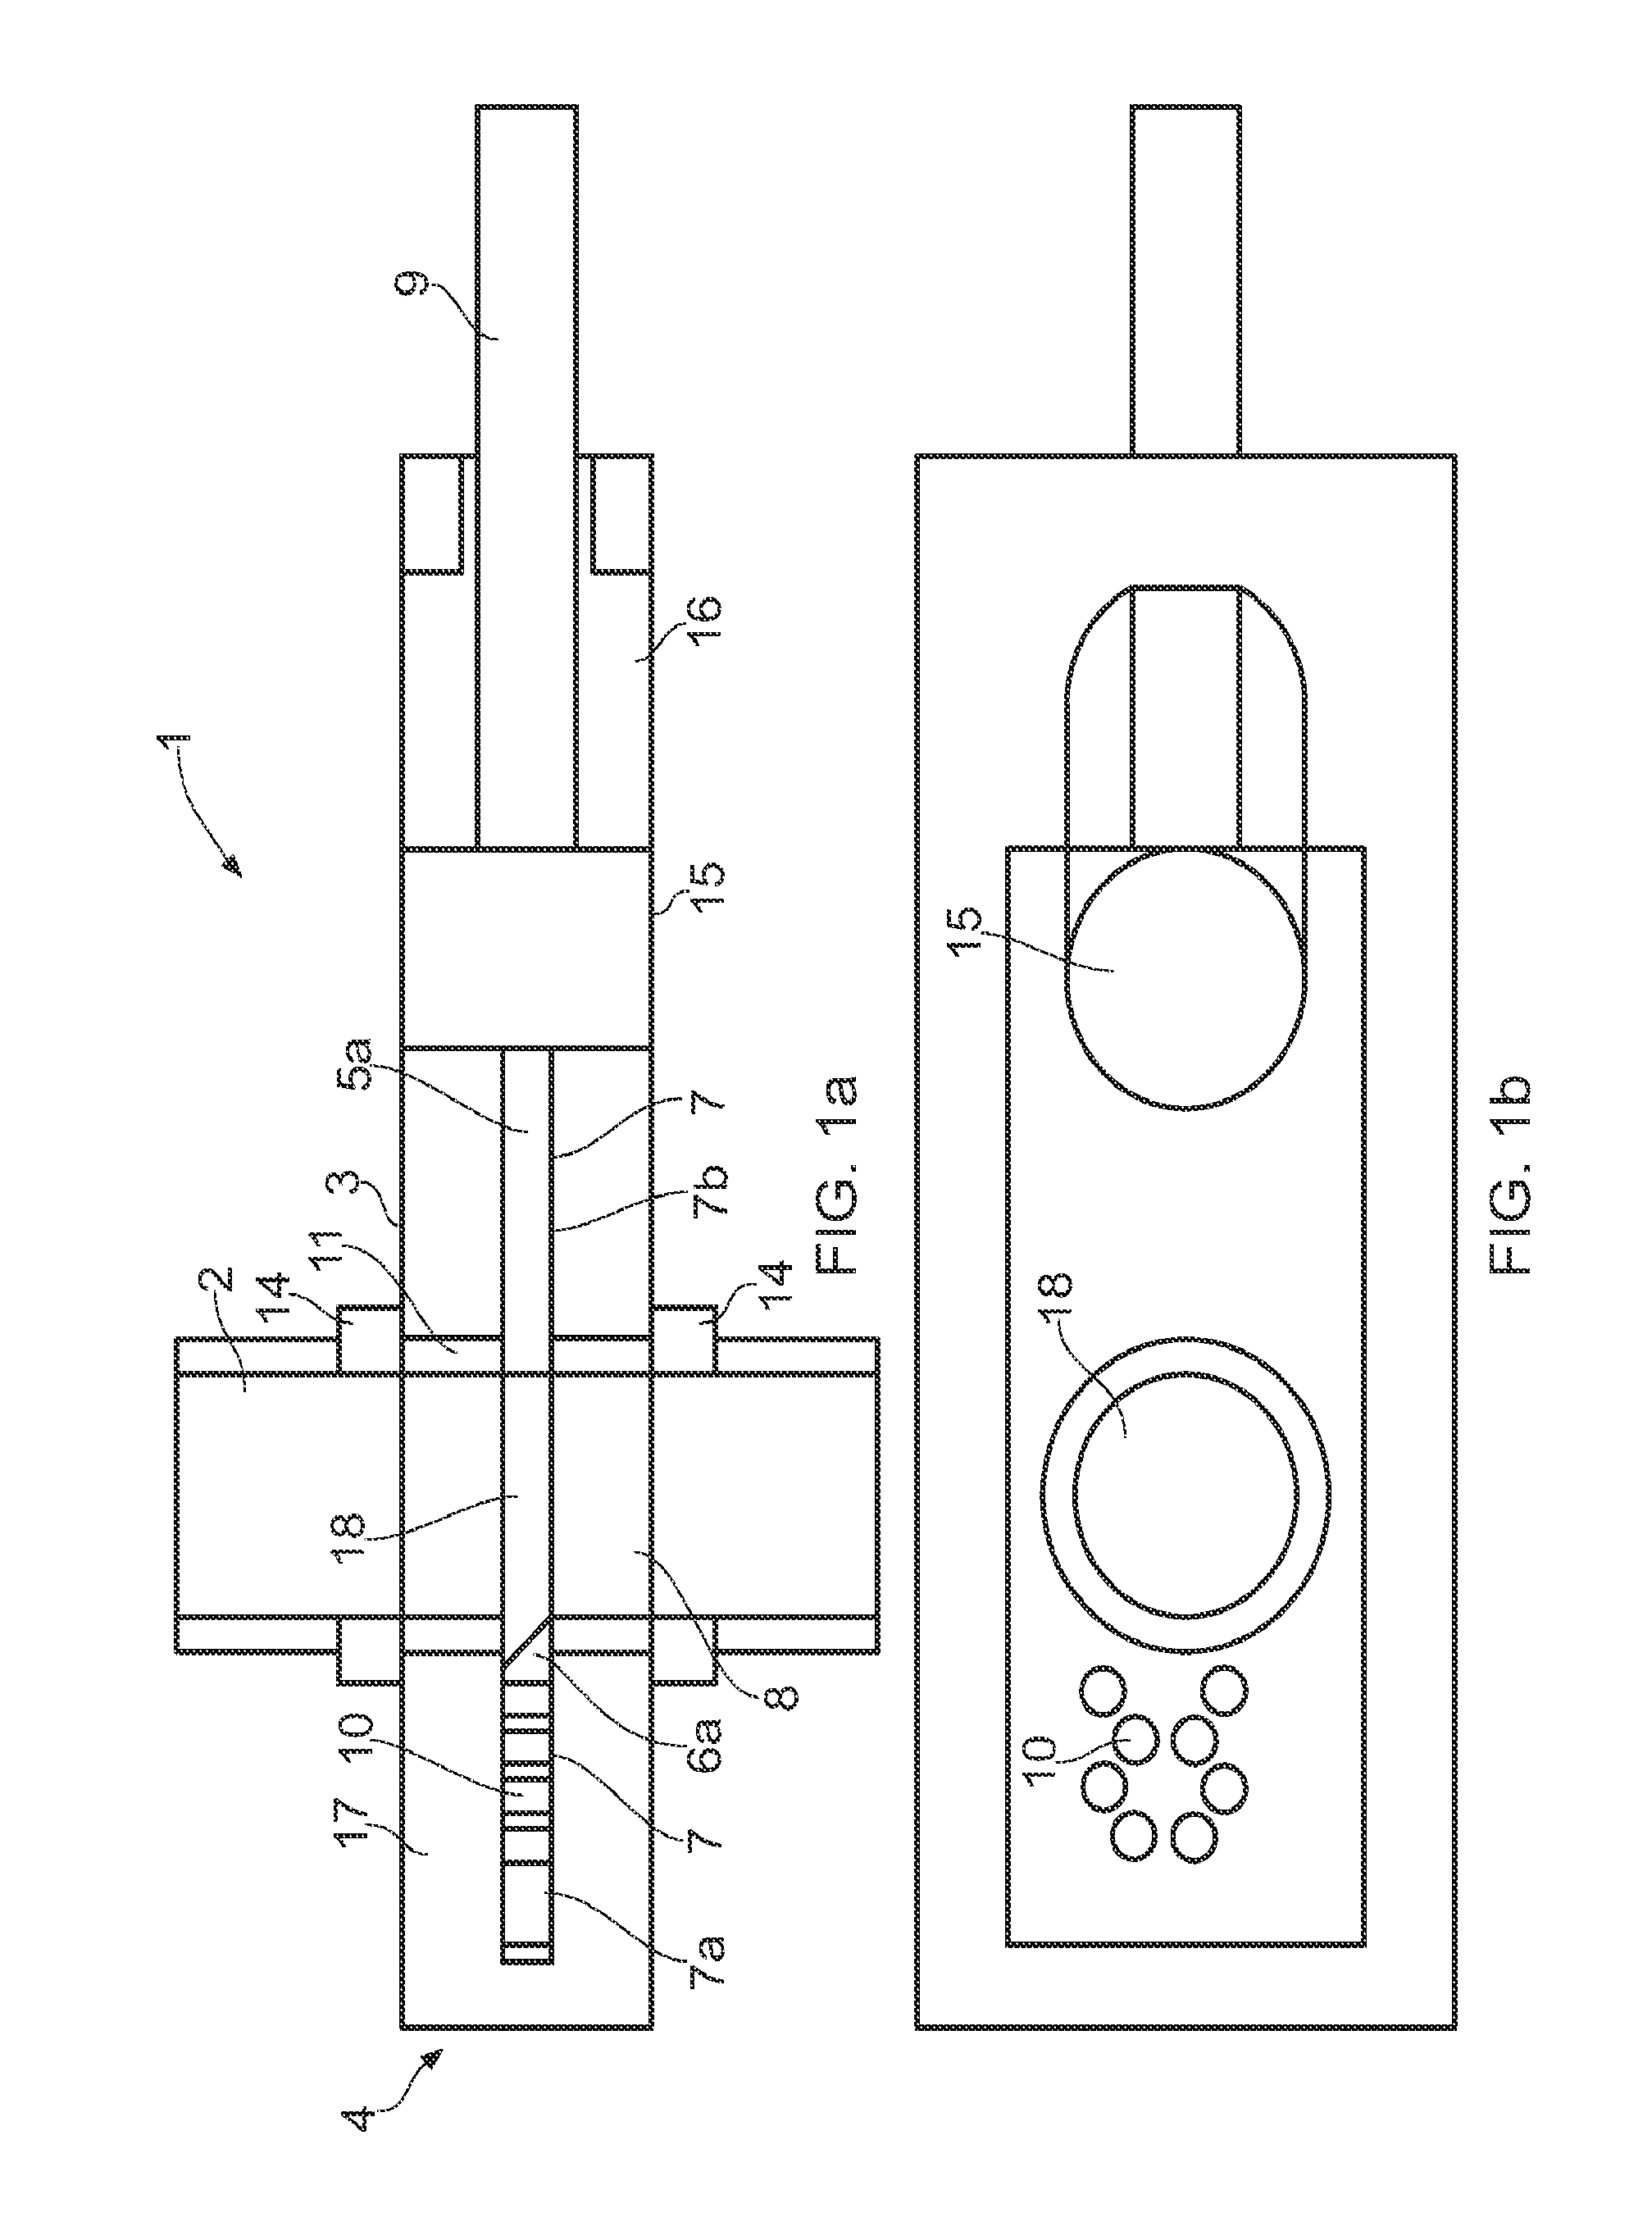 Gate valve assembly comprising a shear gate